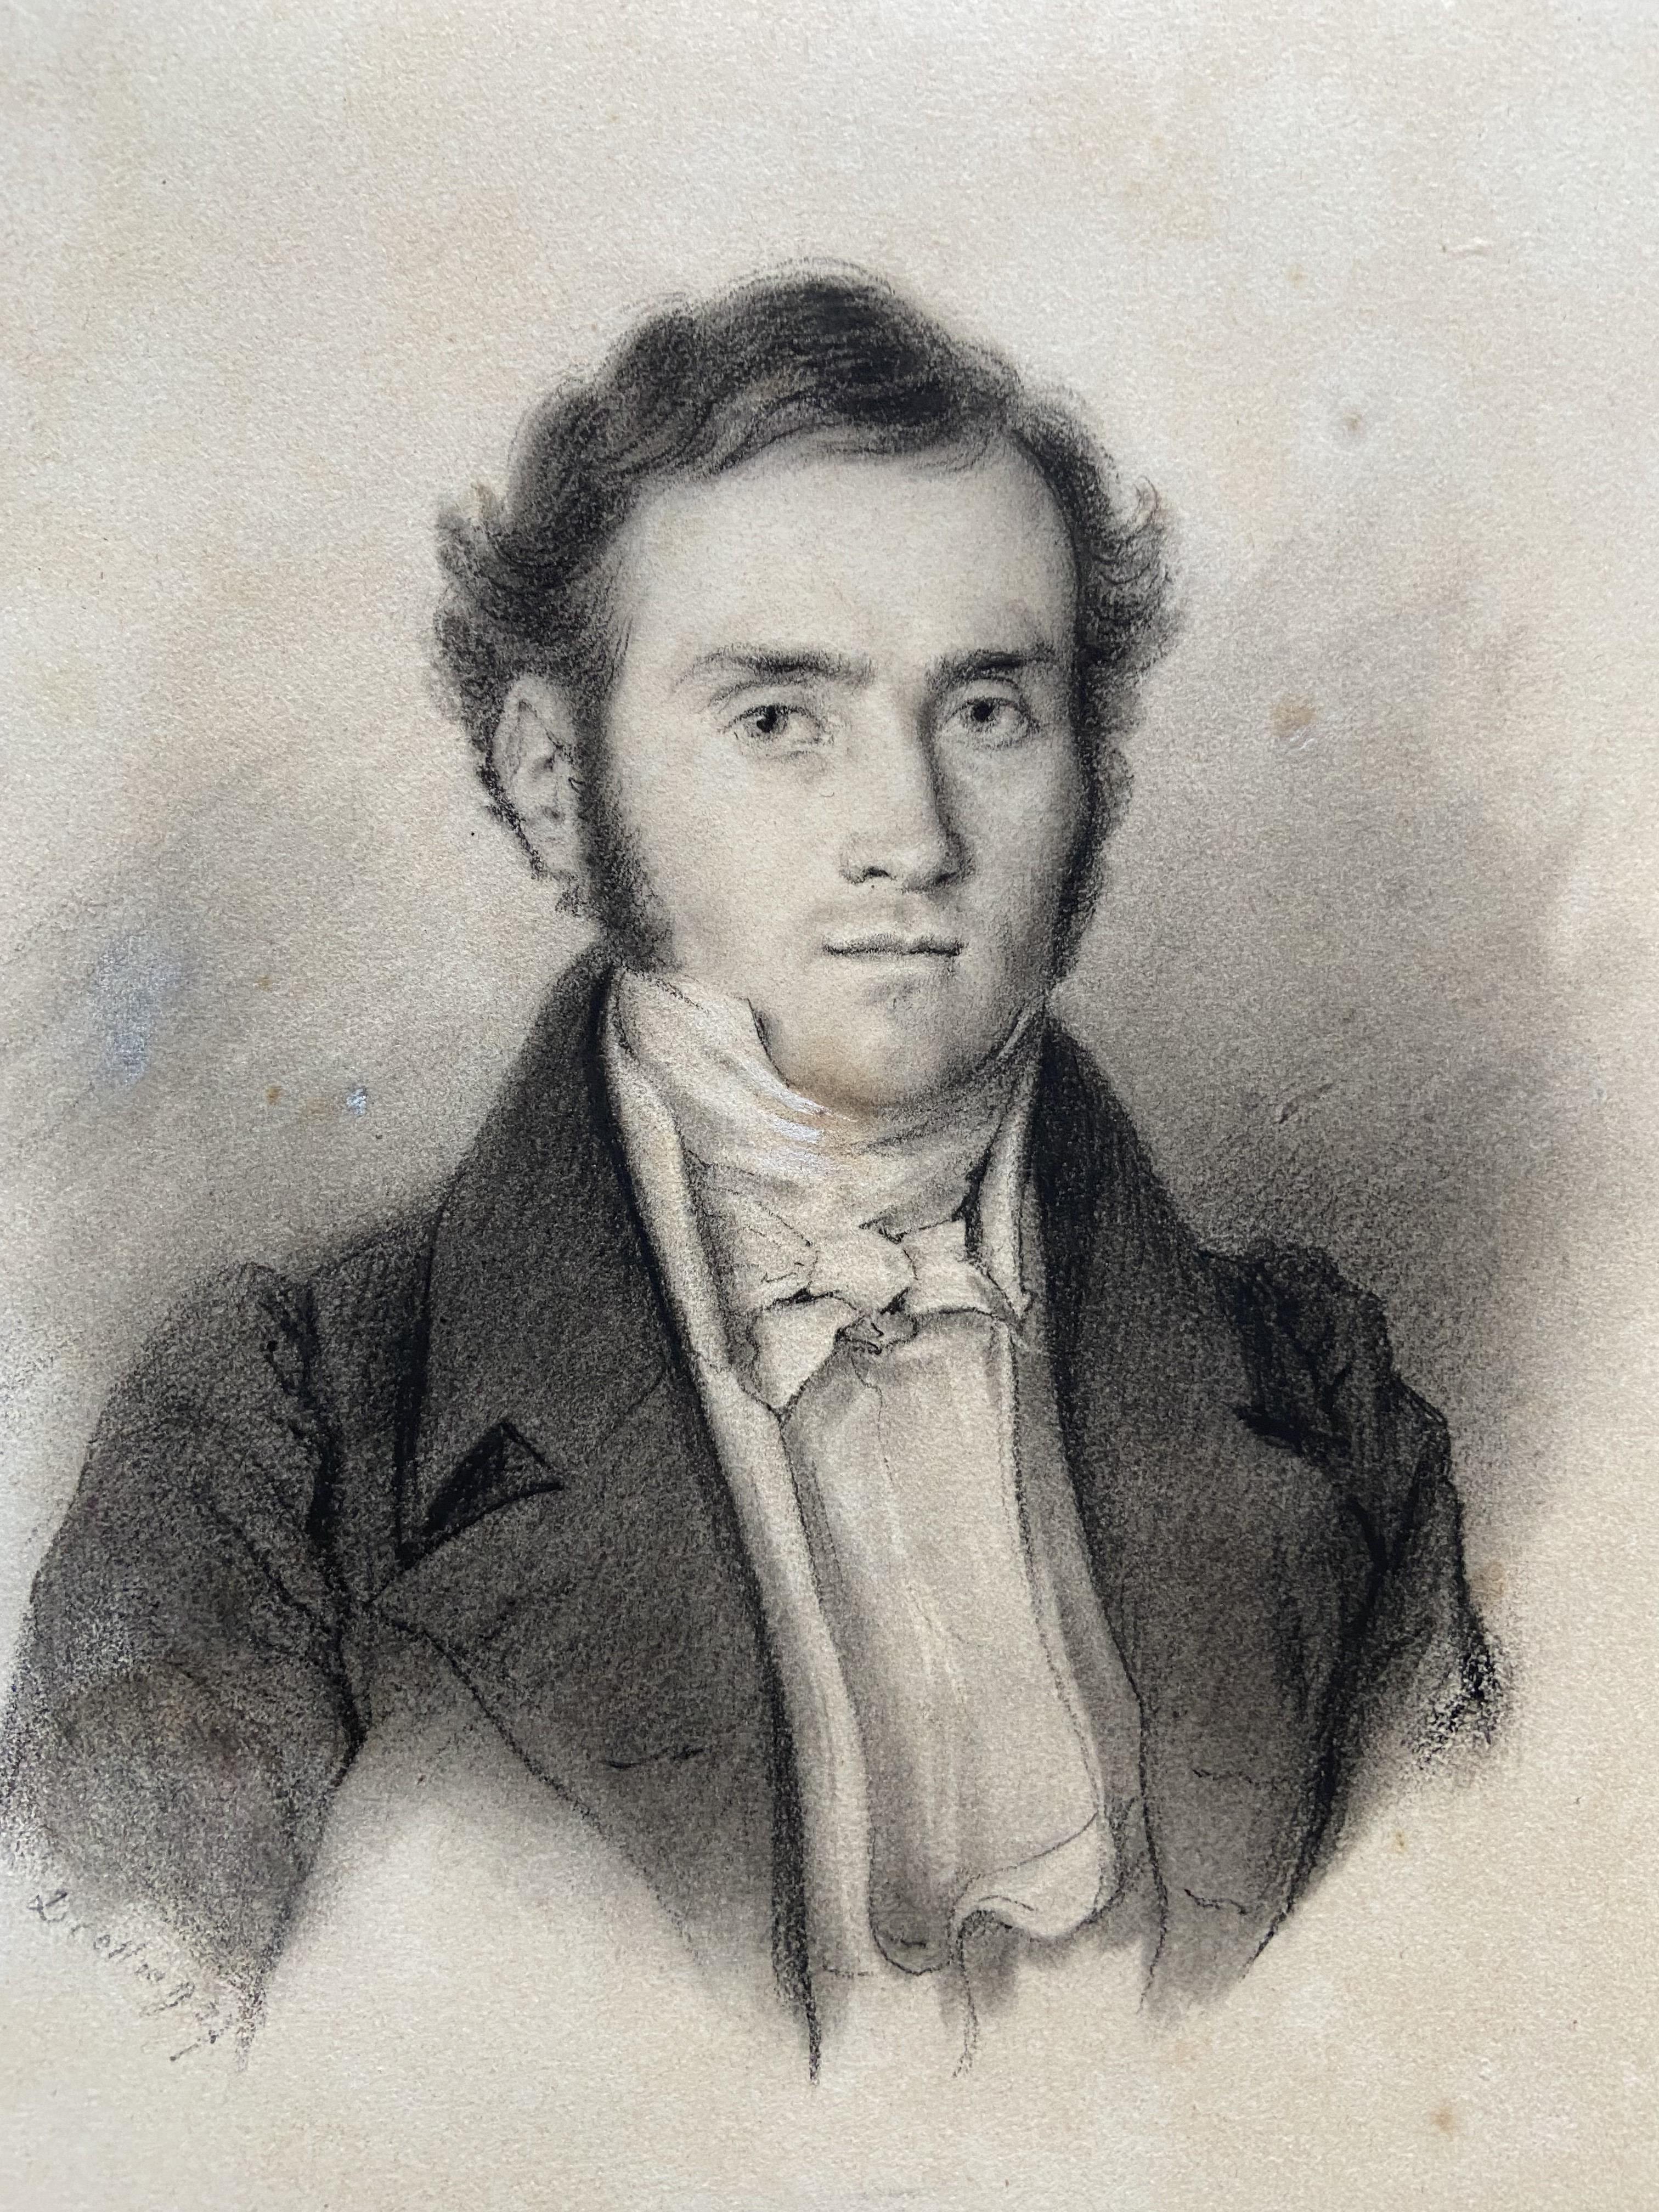 Michel Martin Drolling (1786-1851) 
Portrait of a man, 
signed lower left and dated (18)27 or (18)37 ?
black chalk on paper
22 x 17 cm
In good condition, except some stains and foxings as visible on the photographs
In a vintage frame : 39 x 32.5